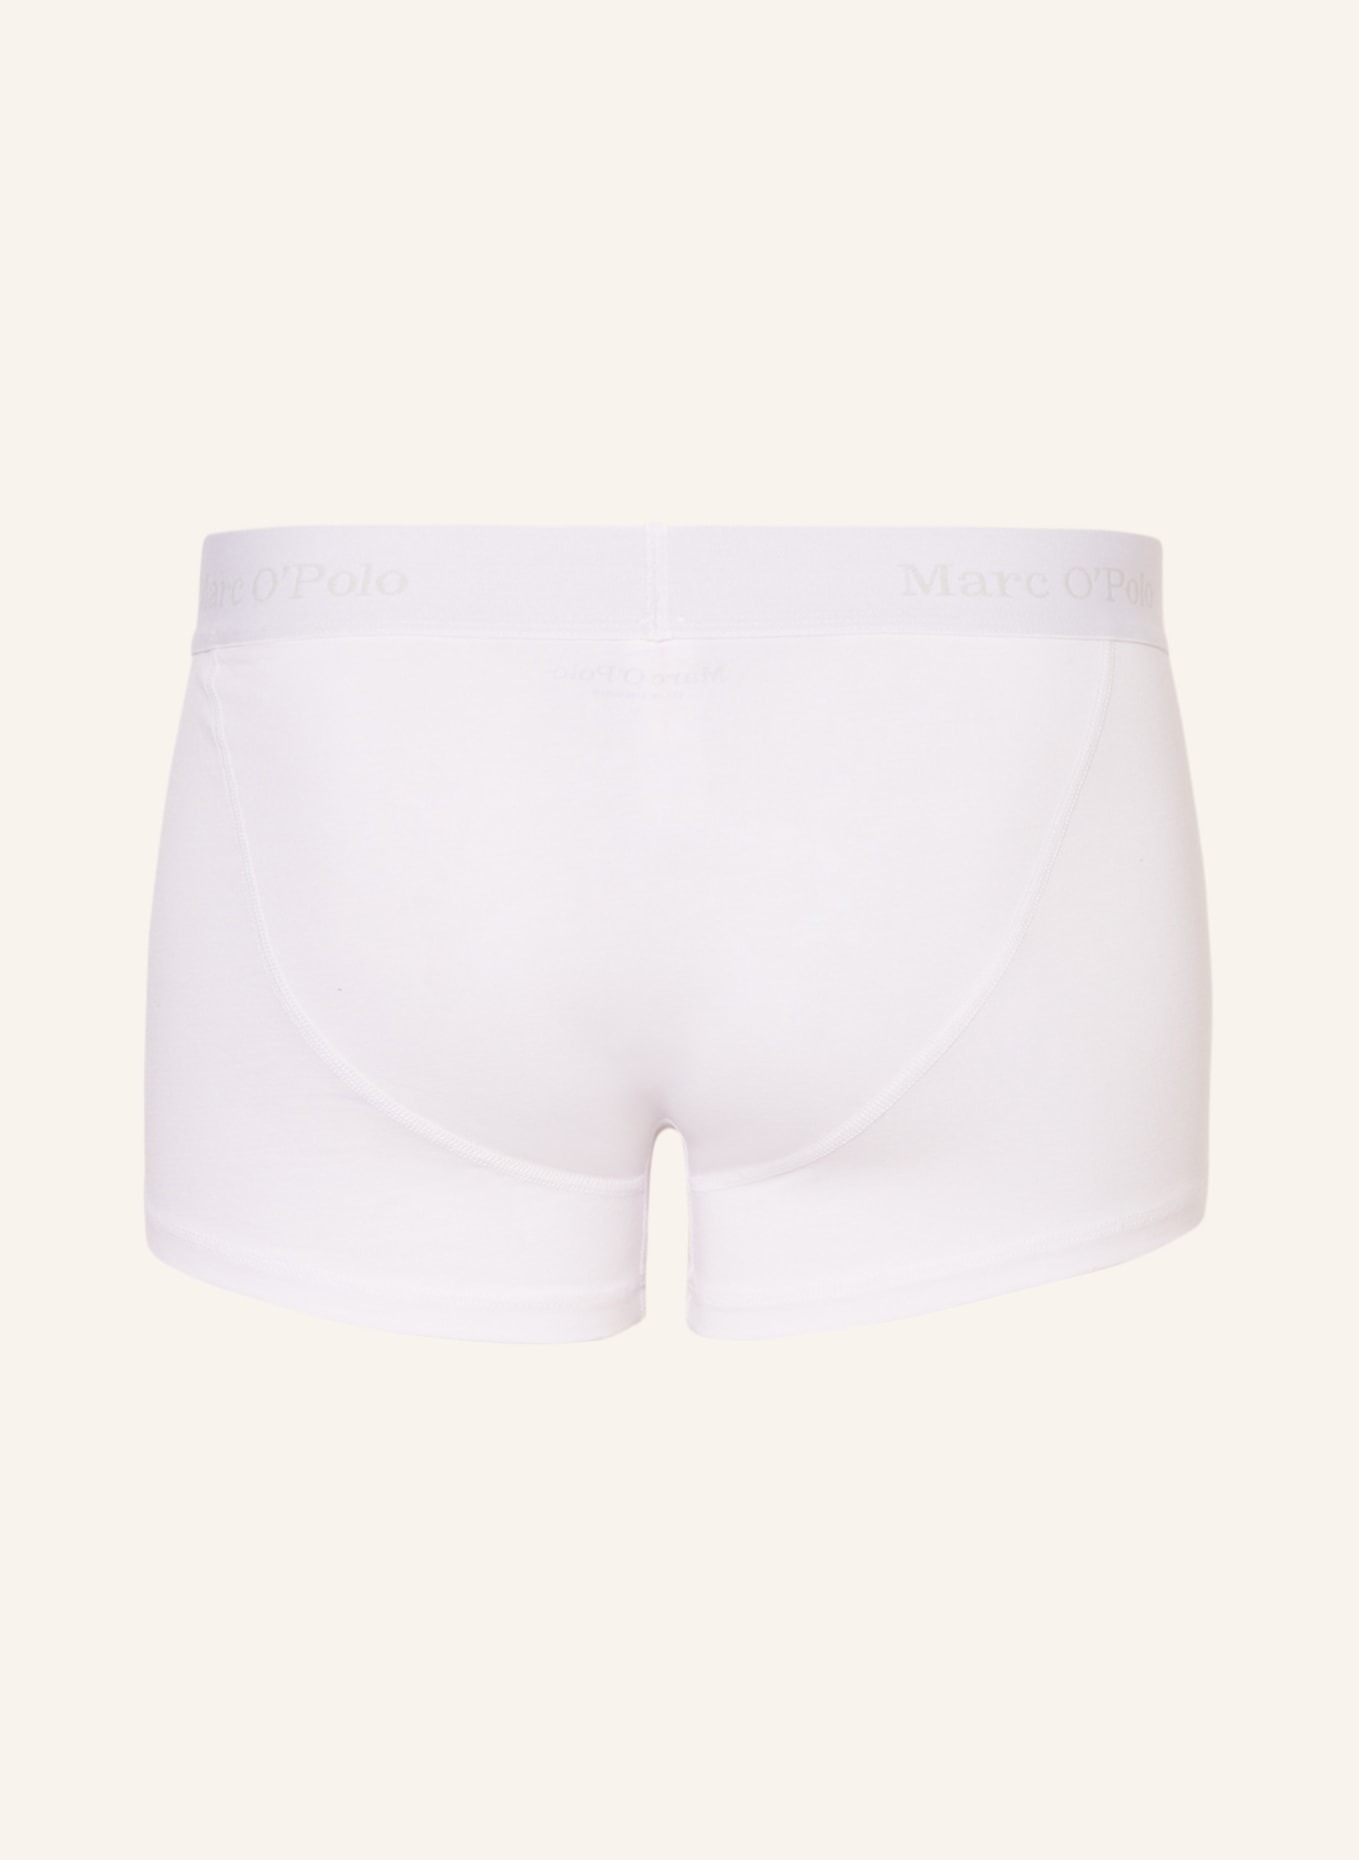 Marc O'Polo 3er-Pack Boxershorts, Farbe: WEISS (Bild 2)